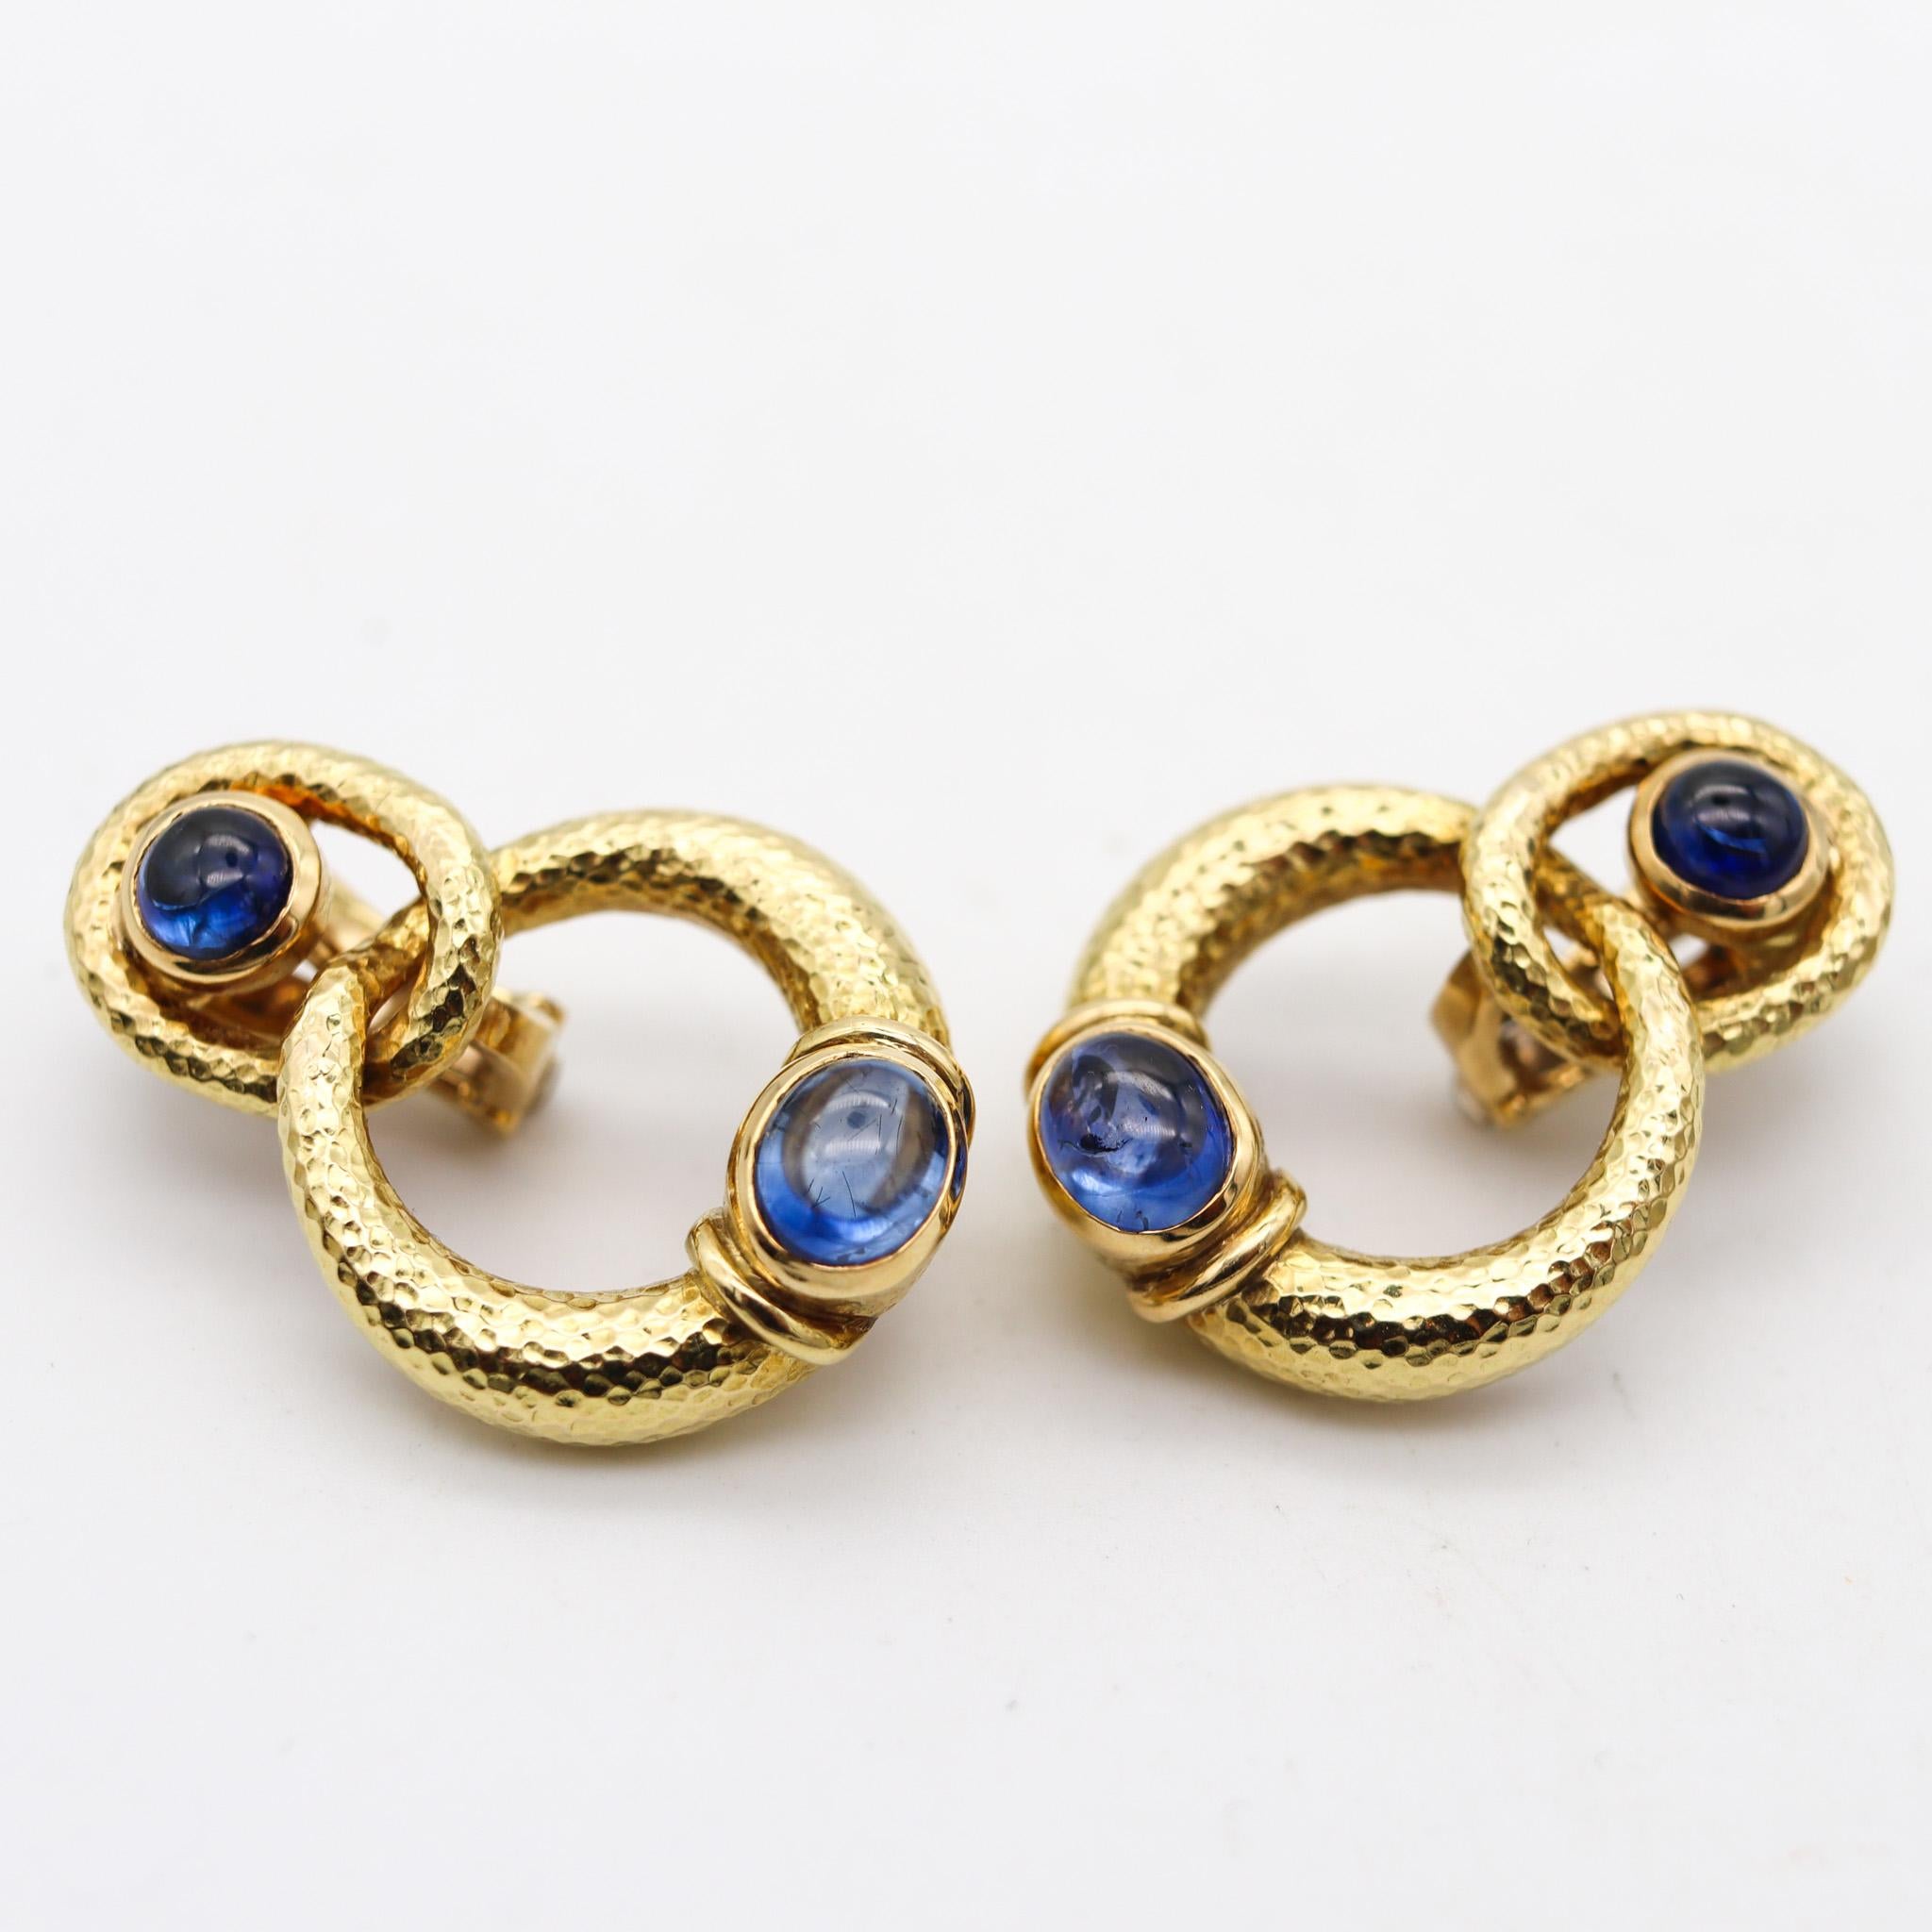 Cabochon David Webb 1970 Dangle Clips-on Earrings In 18Kt Gold With 7.34 Ctw Sapphires For Sale